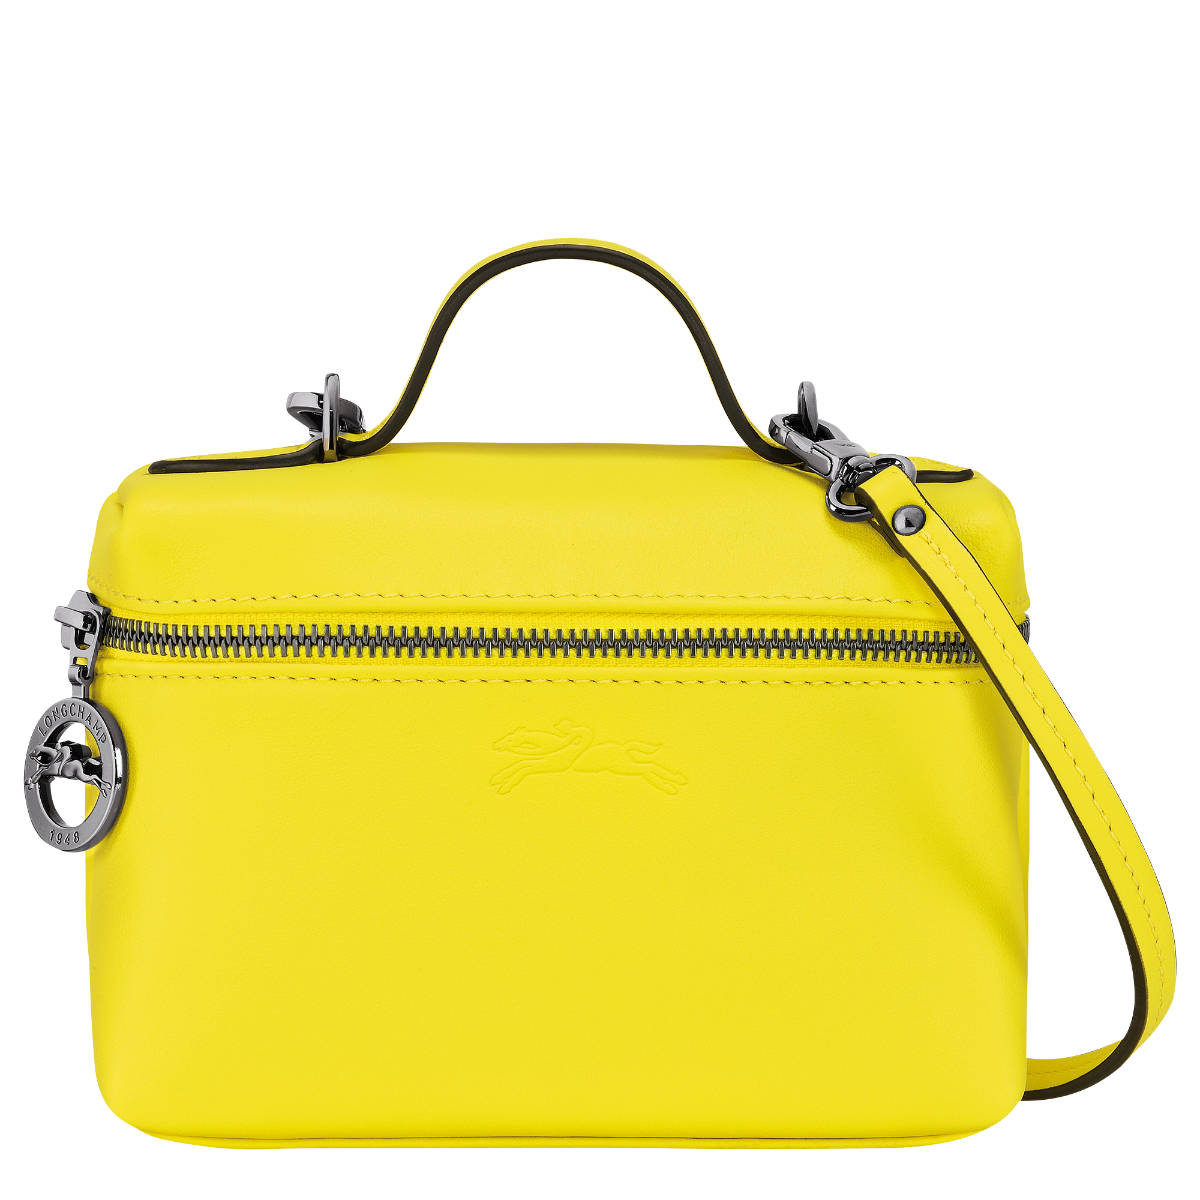 A New Look For Le Pliage Cuir